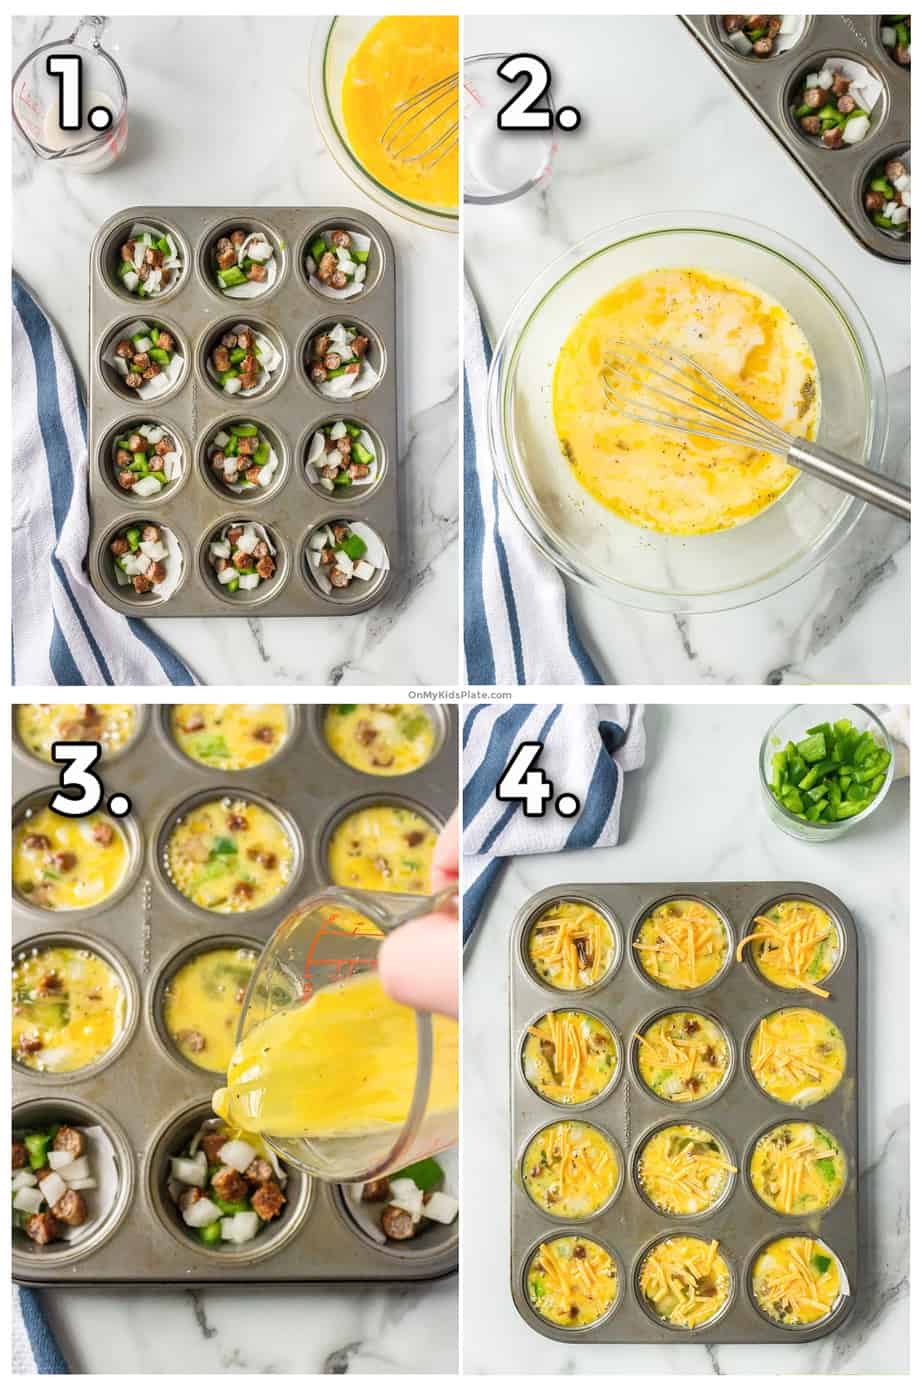 Steps showing you how to fill the muffins with sausage, cheese and egg mixture to bake.